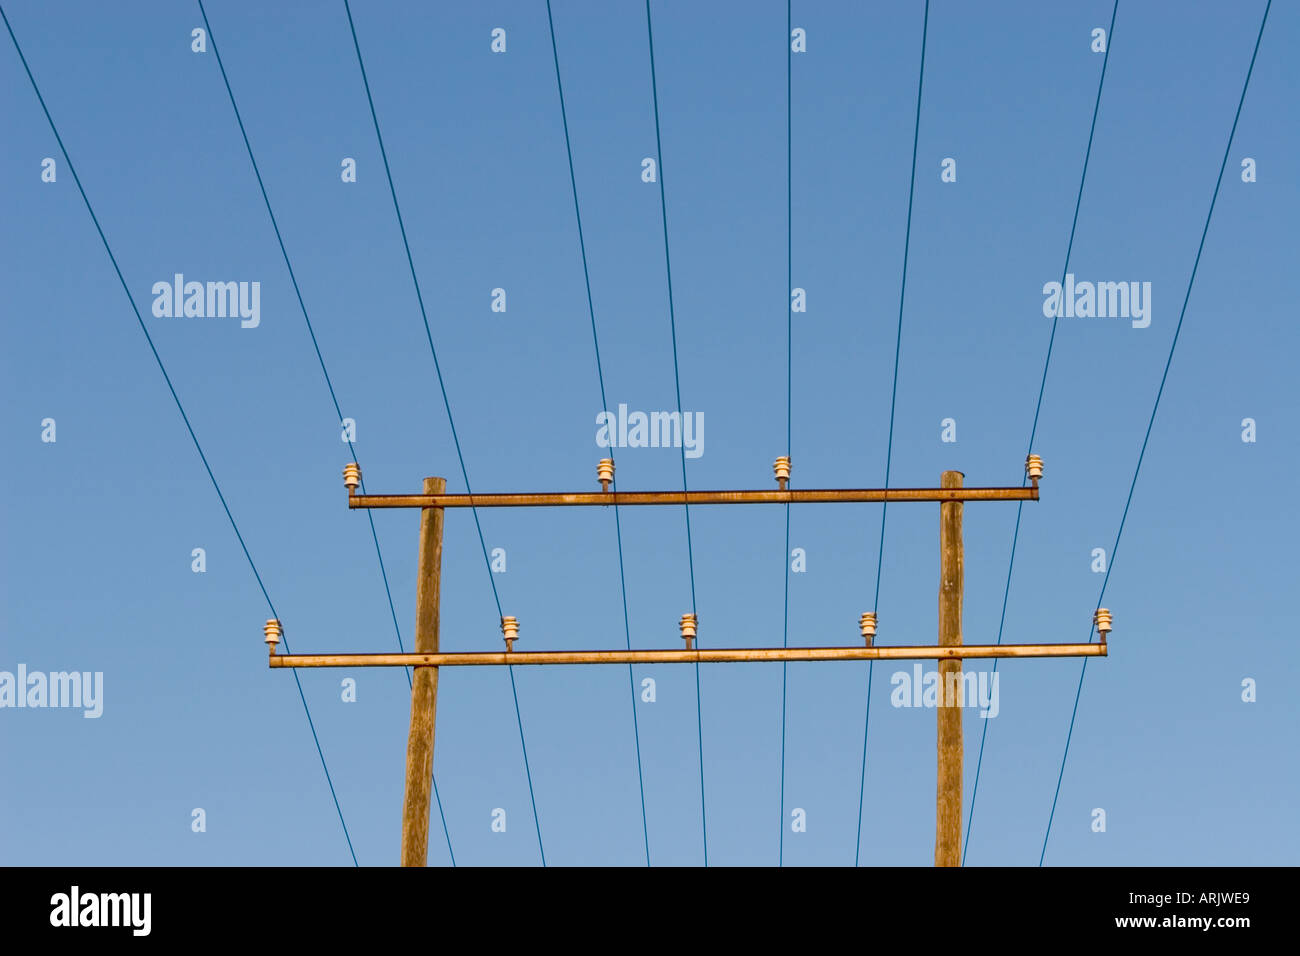 Power line using double wooden pylons made of pressure treated wood, Finland Stock Photo